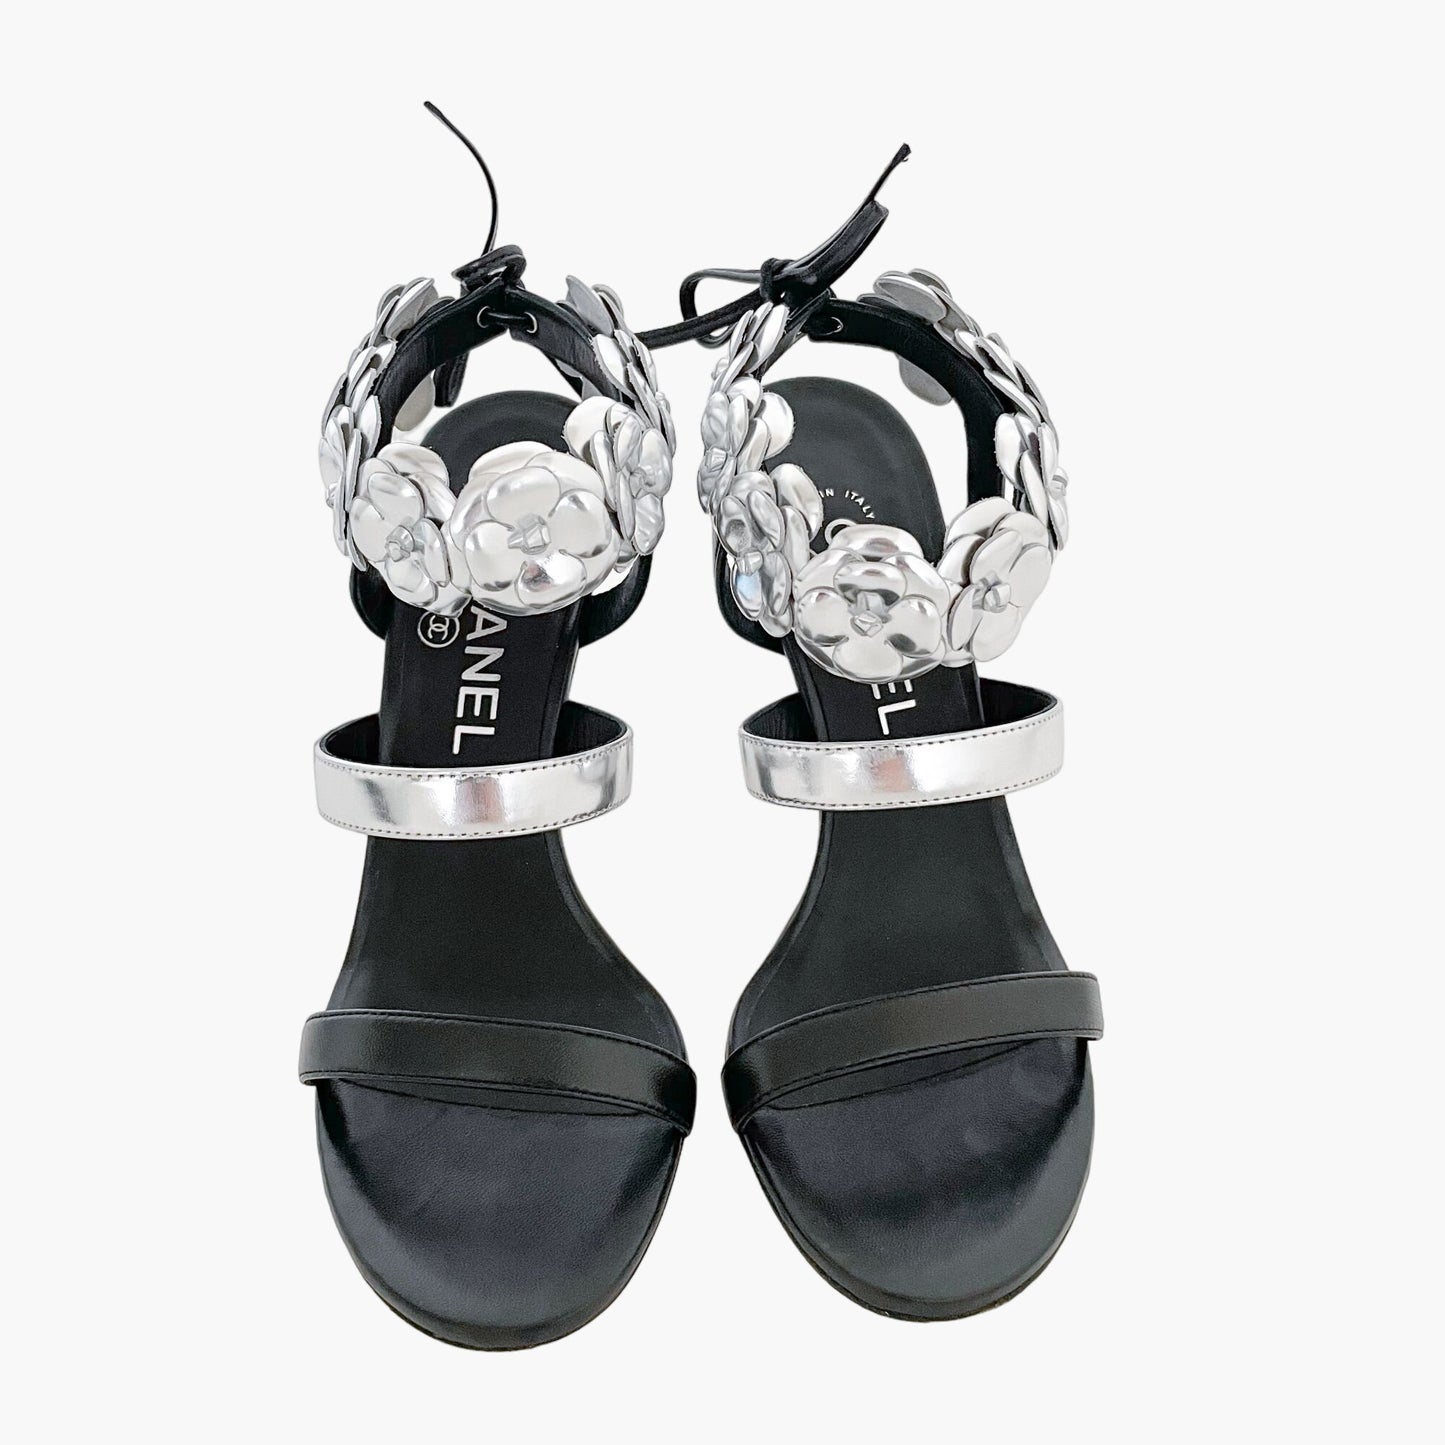 Chanel Camellia Sandals in Black & Silver Size 36.5